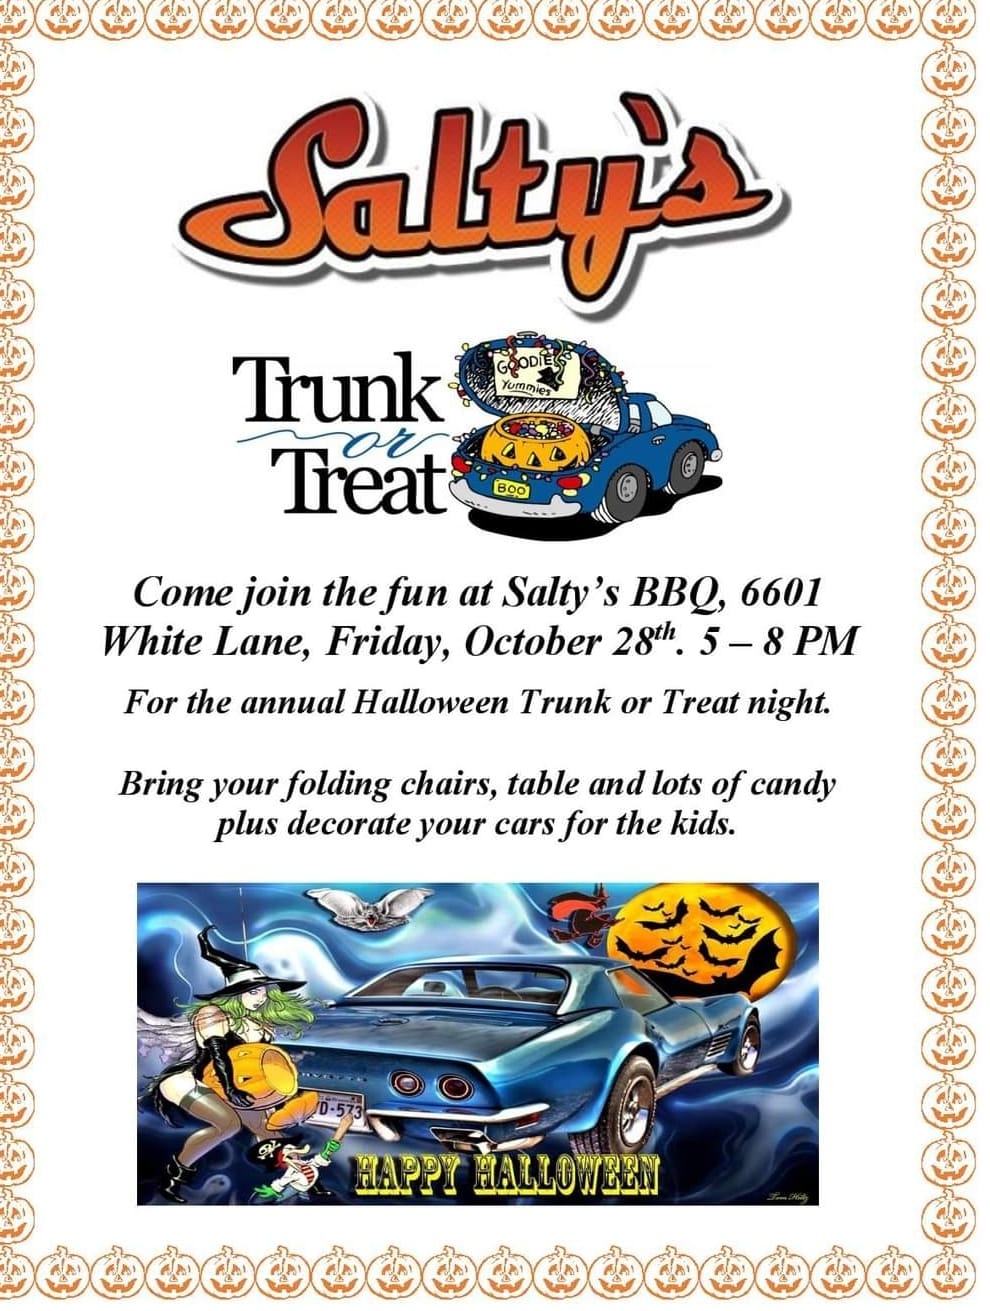 Salty's Trunk or Treat Car Show